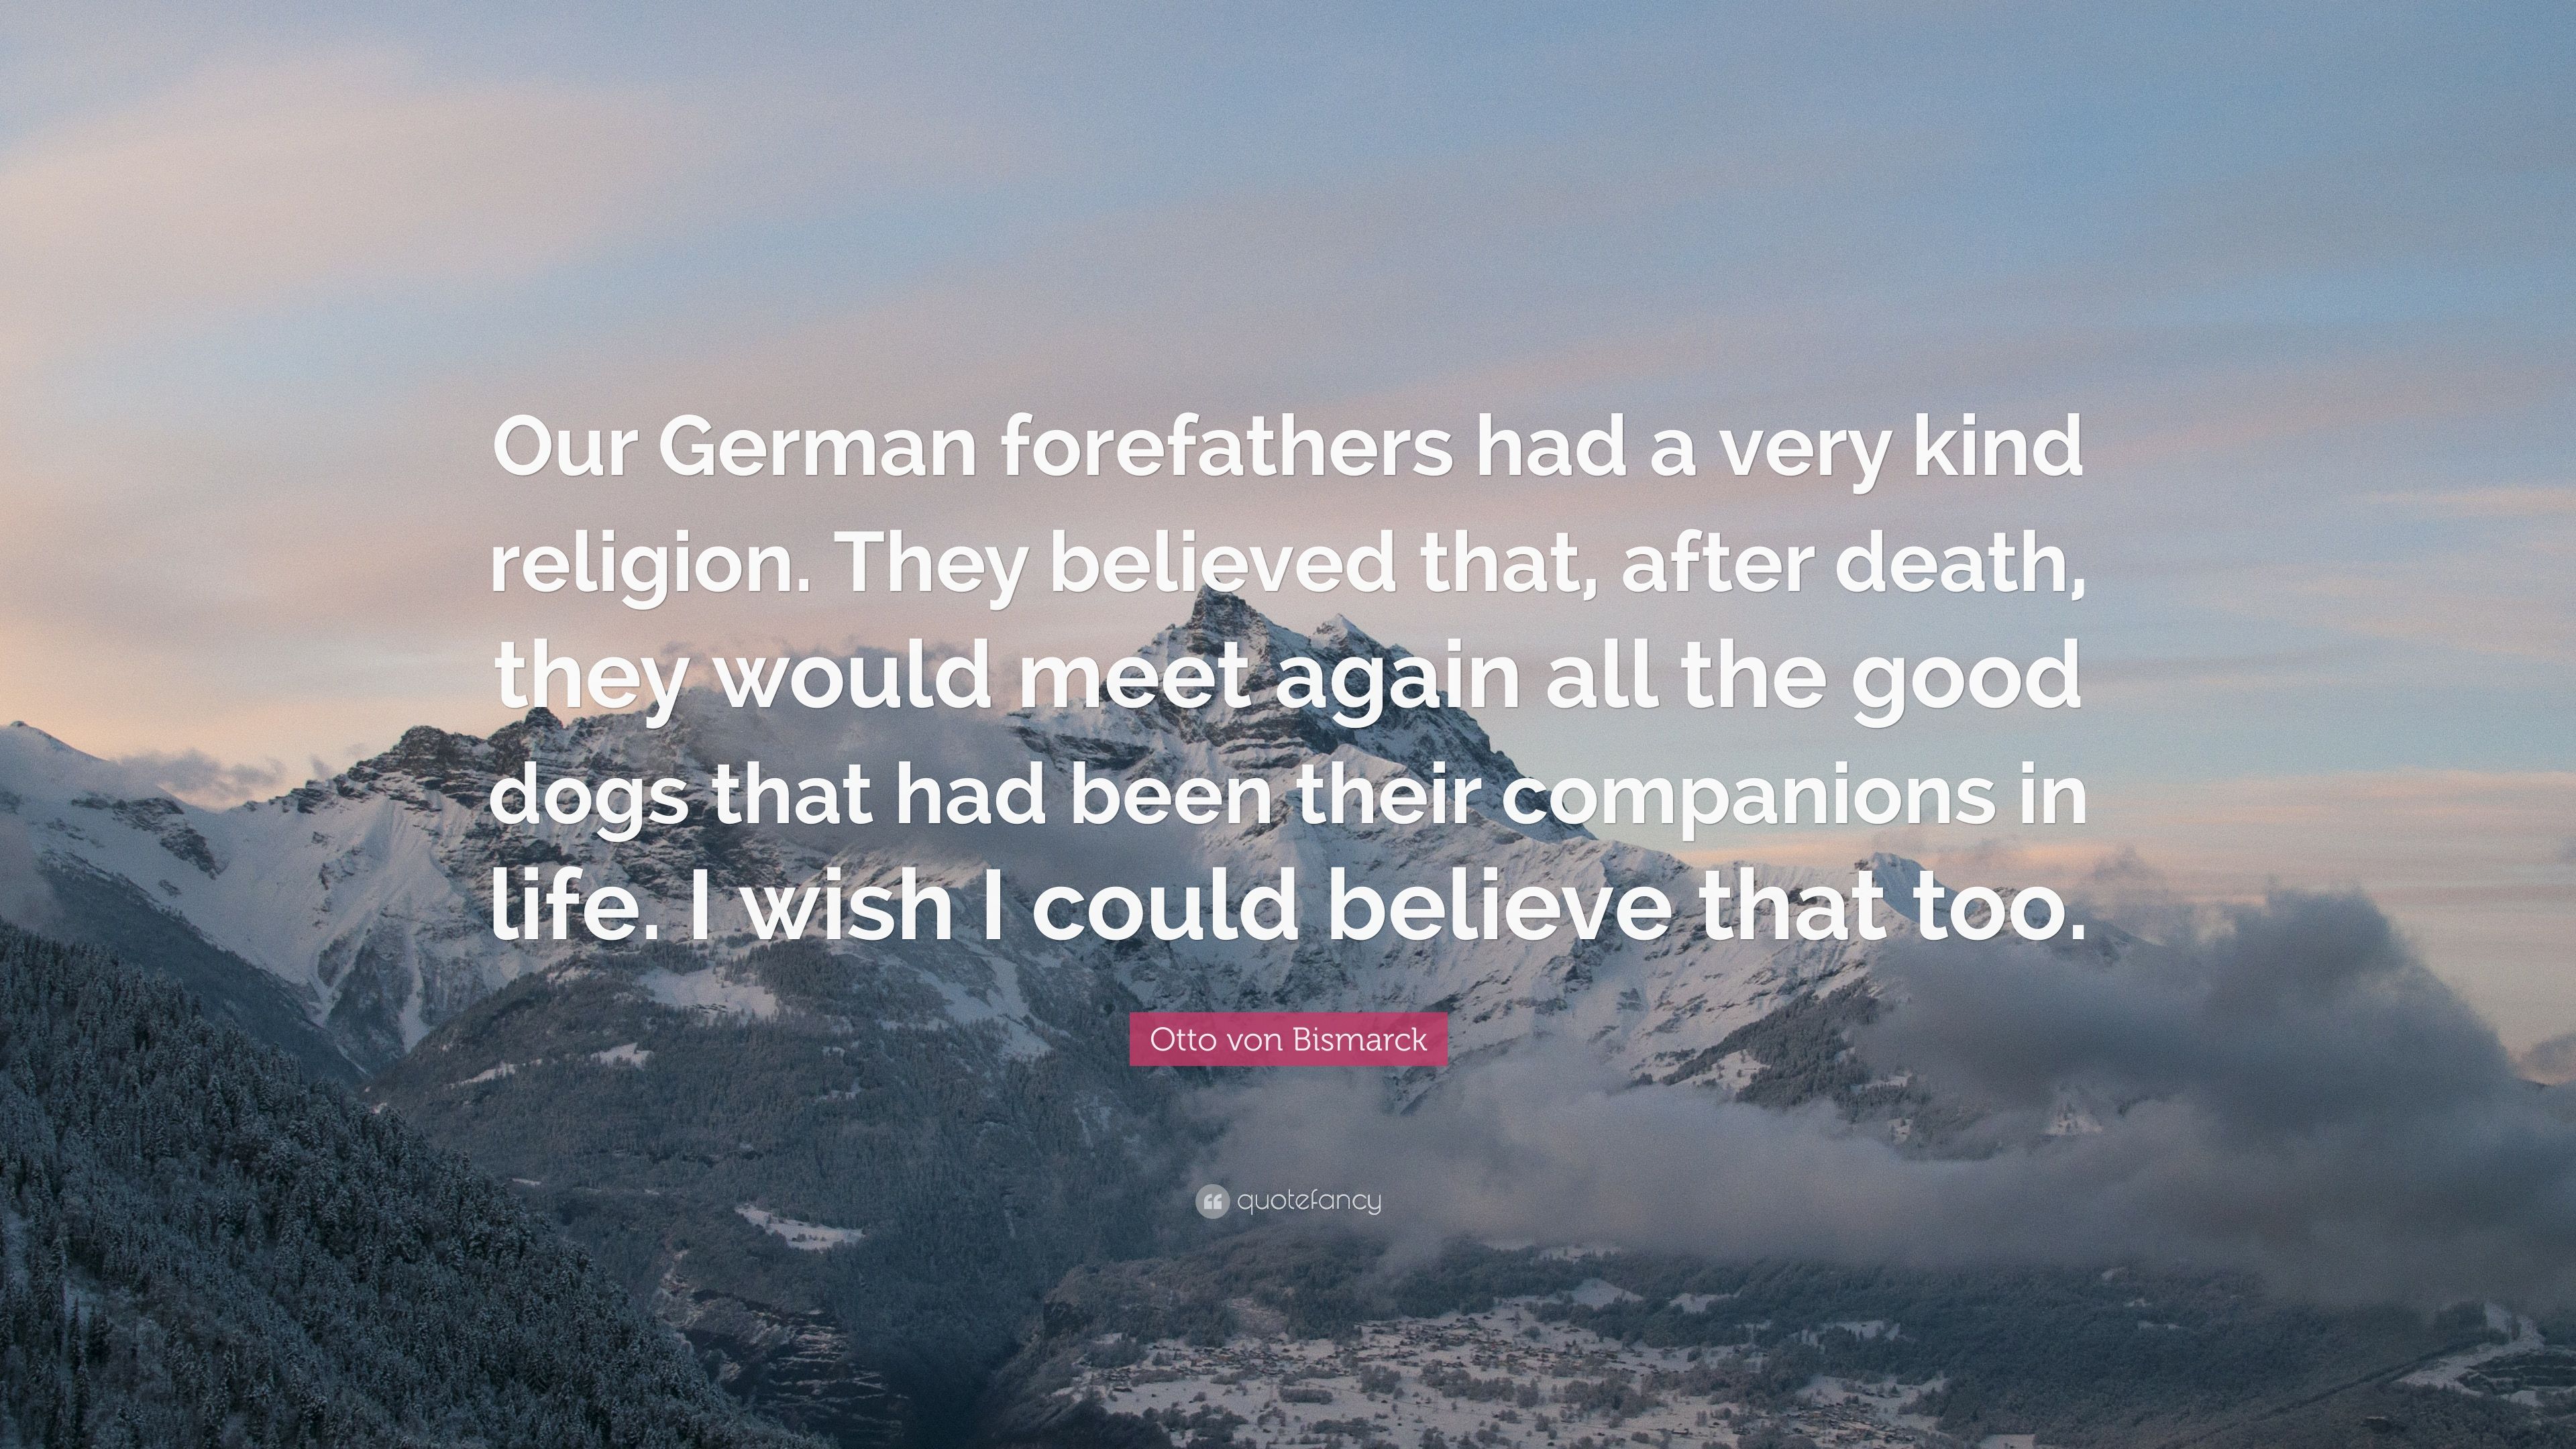 Otto von Bismarck Quote: “Our German forefathers had a very kind